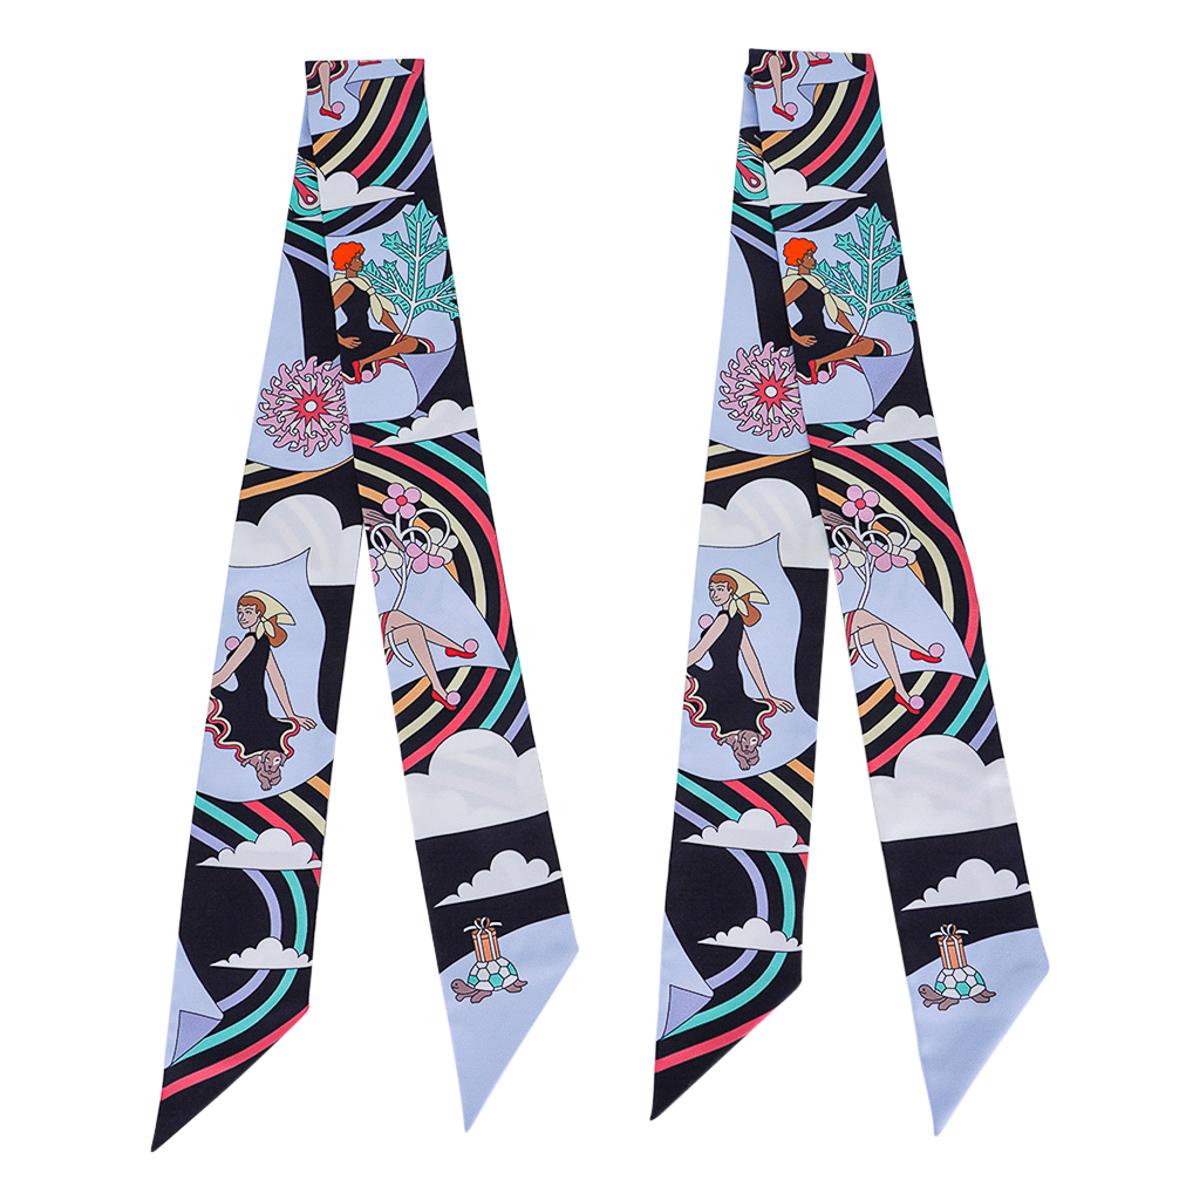 Hermes Twilly Carres Volants Noir / Ciel Silk Scarf Set of 2 In New Condition For Sale In Miami, FL